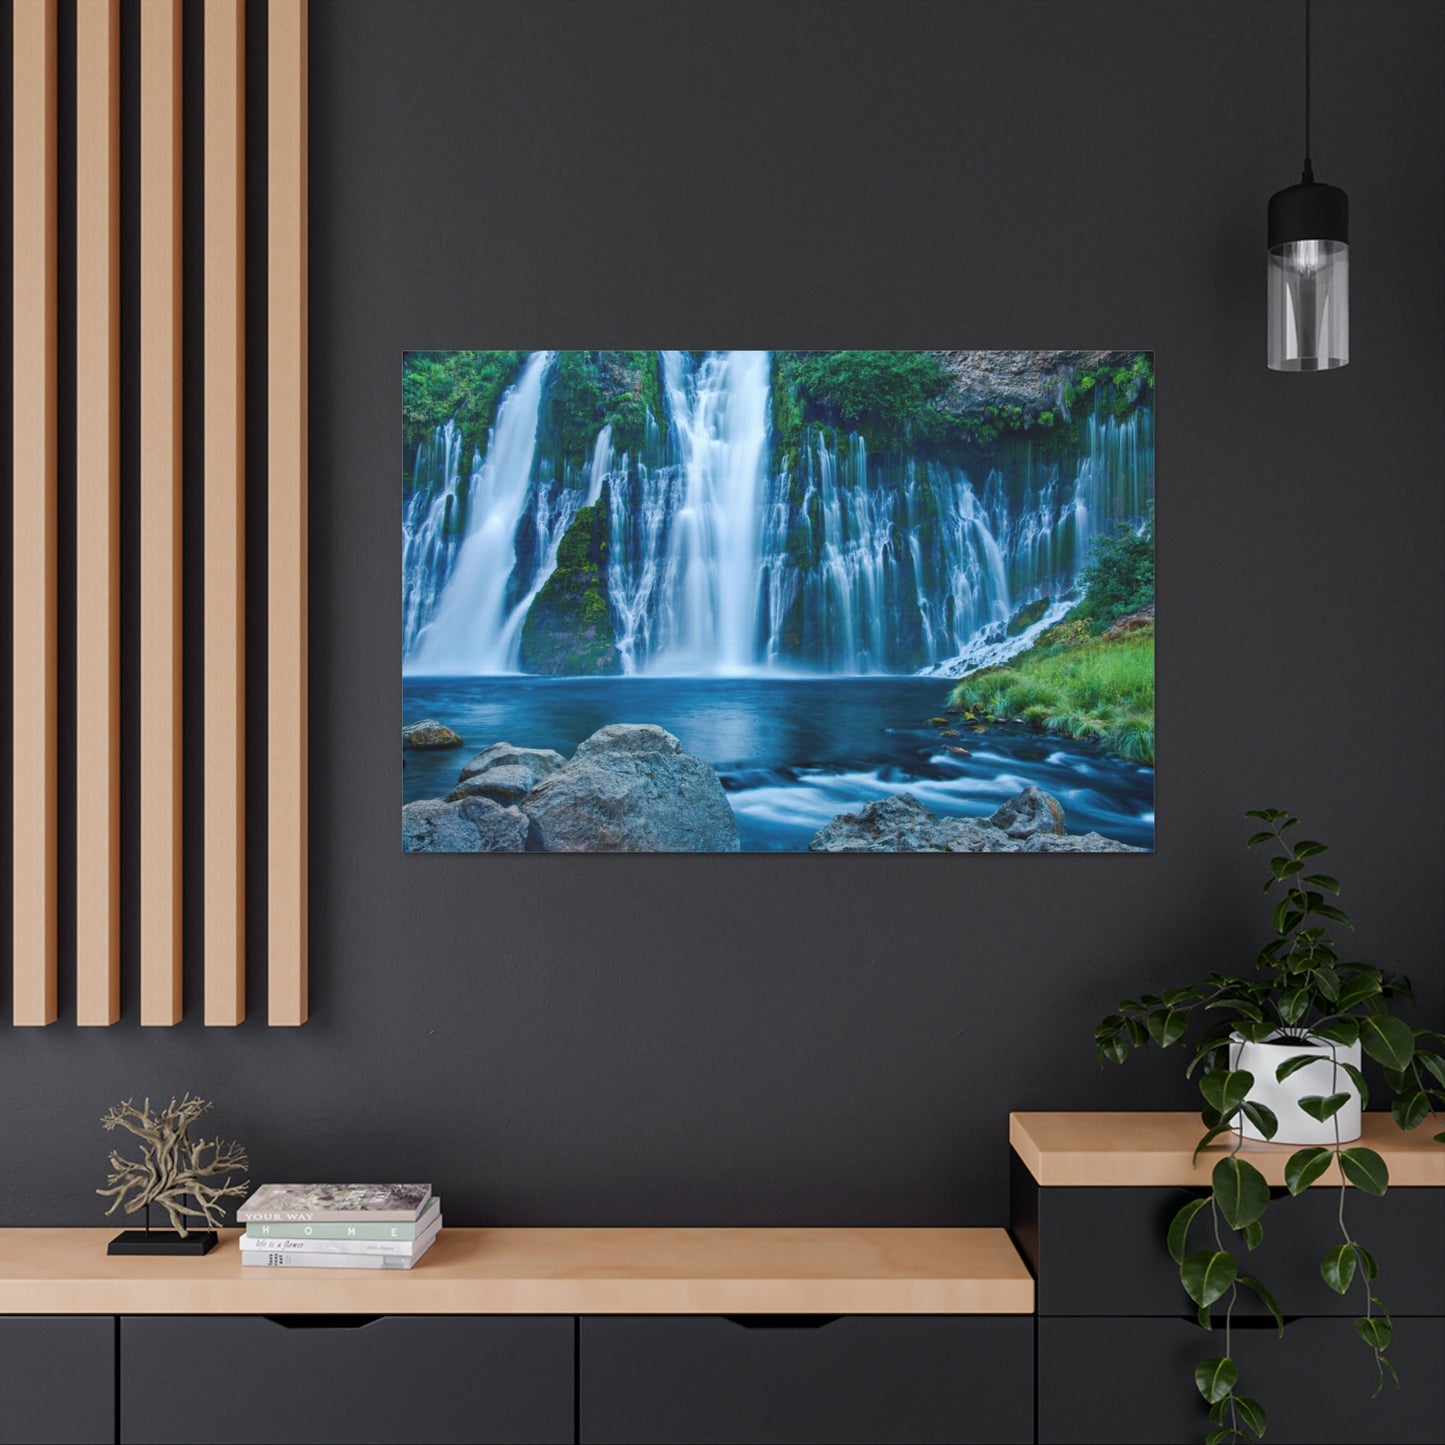 Canvas Print Of Blue Time Lapse Waterfall For Wall Art